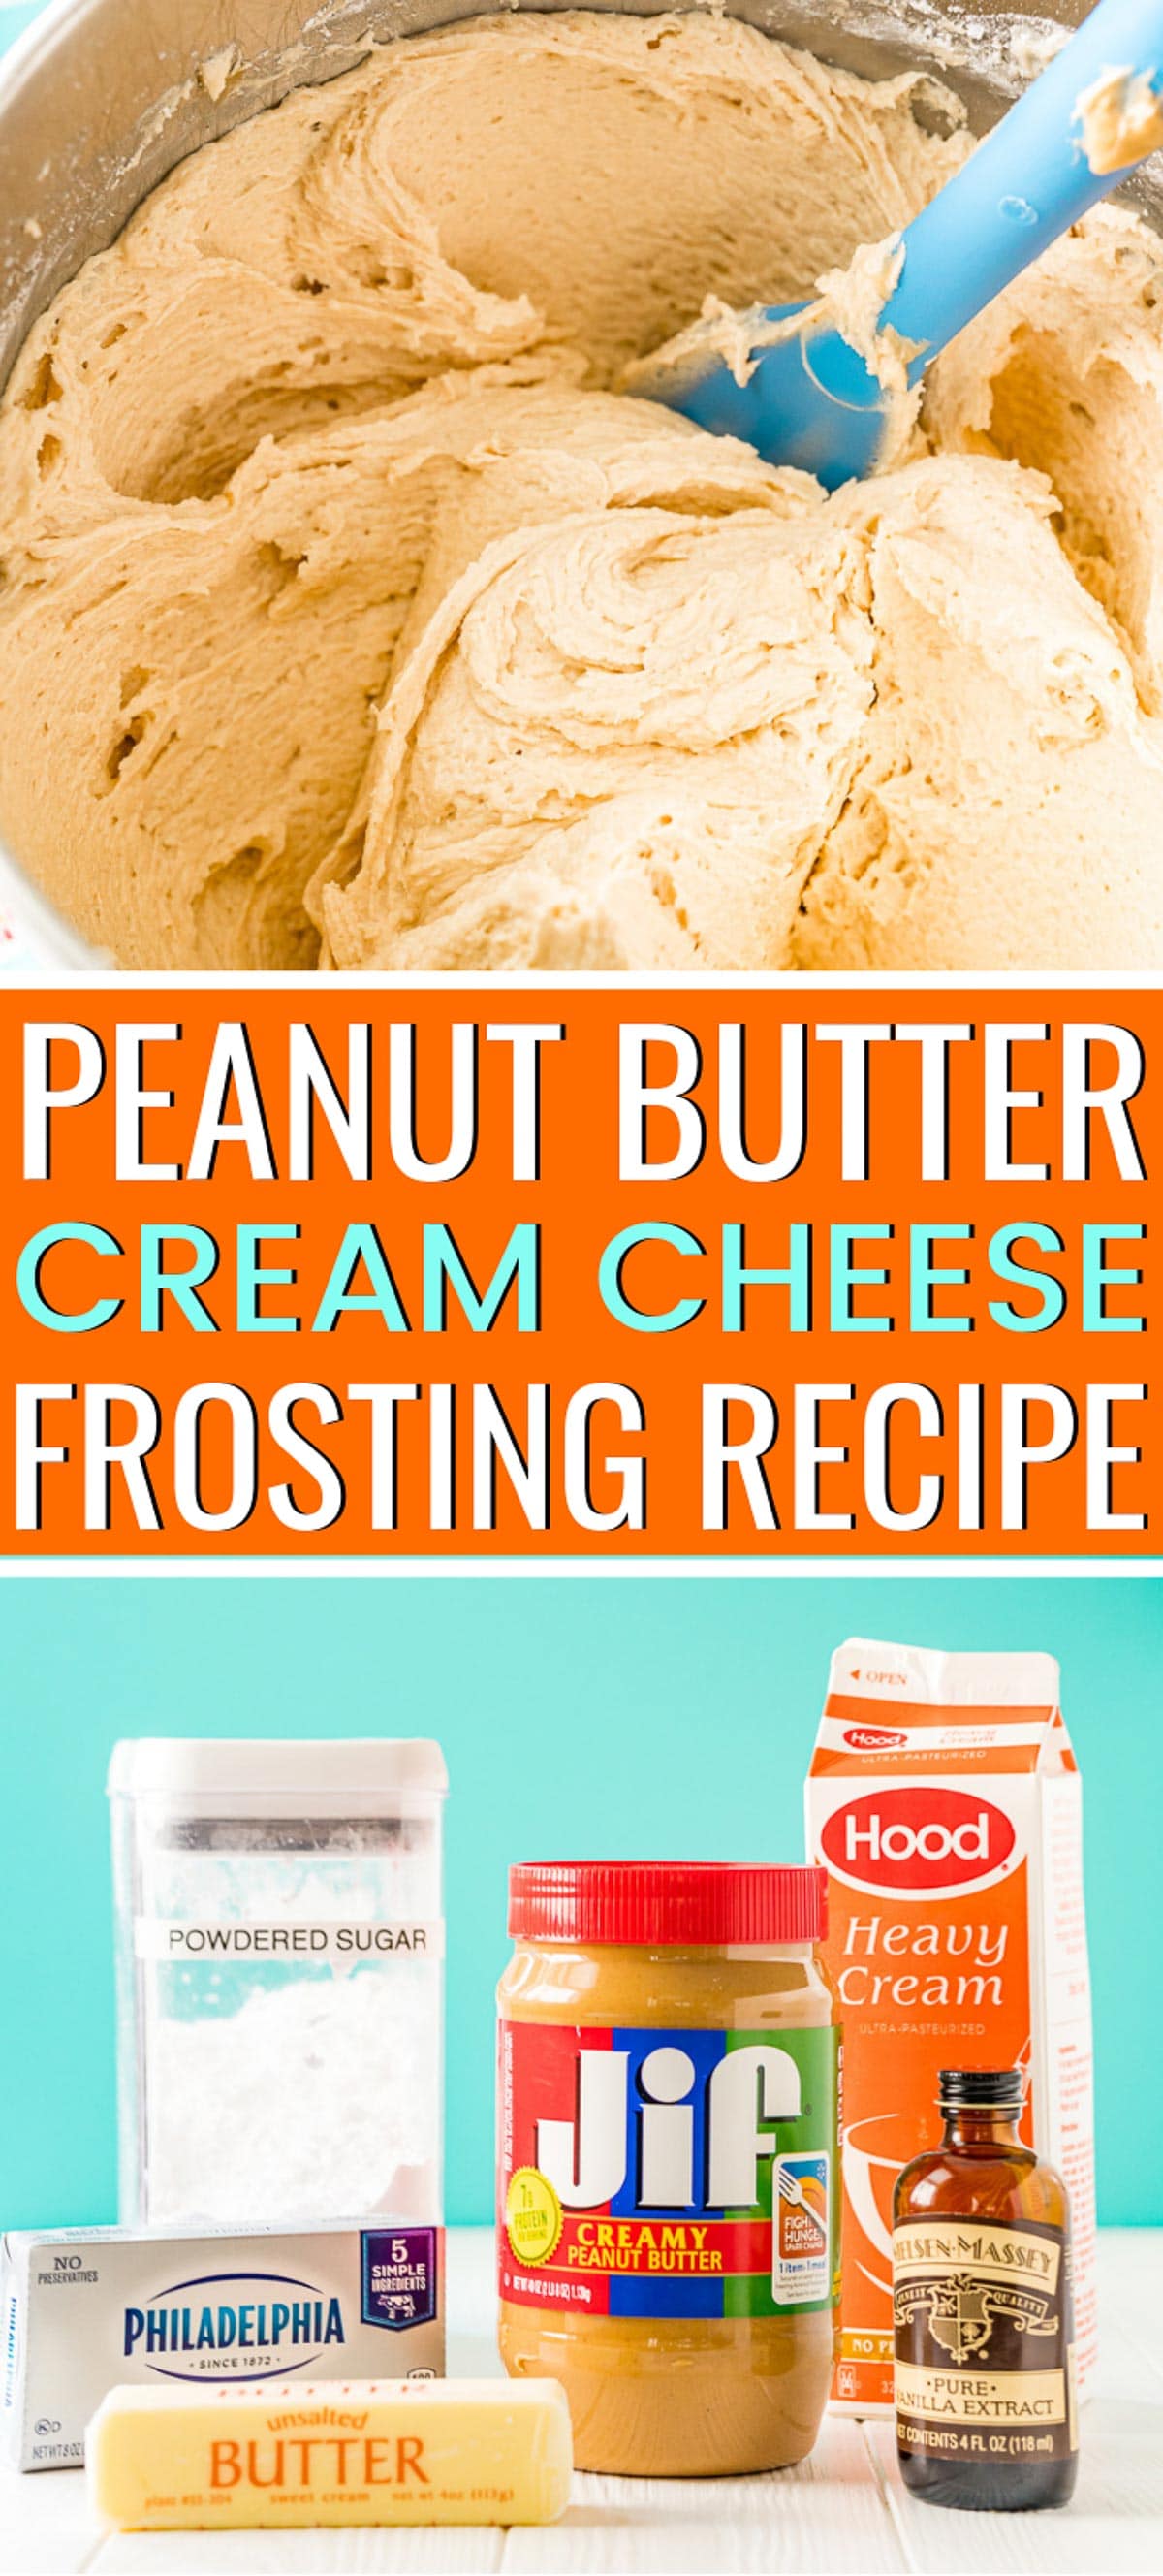 This Peanut Butter Cream Cheese Frosting is a tangy and sweet buttercream recipe made with peanut butter, butter, cream cheese, heavy cream, powdered sugar, and vanilla that takes just 5 minutes to make! via @sugarandsoulco